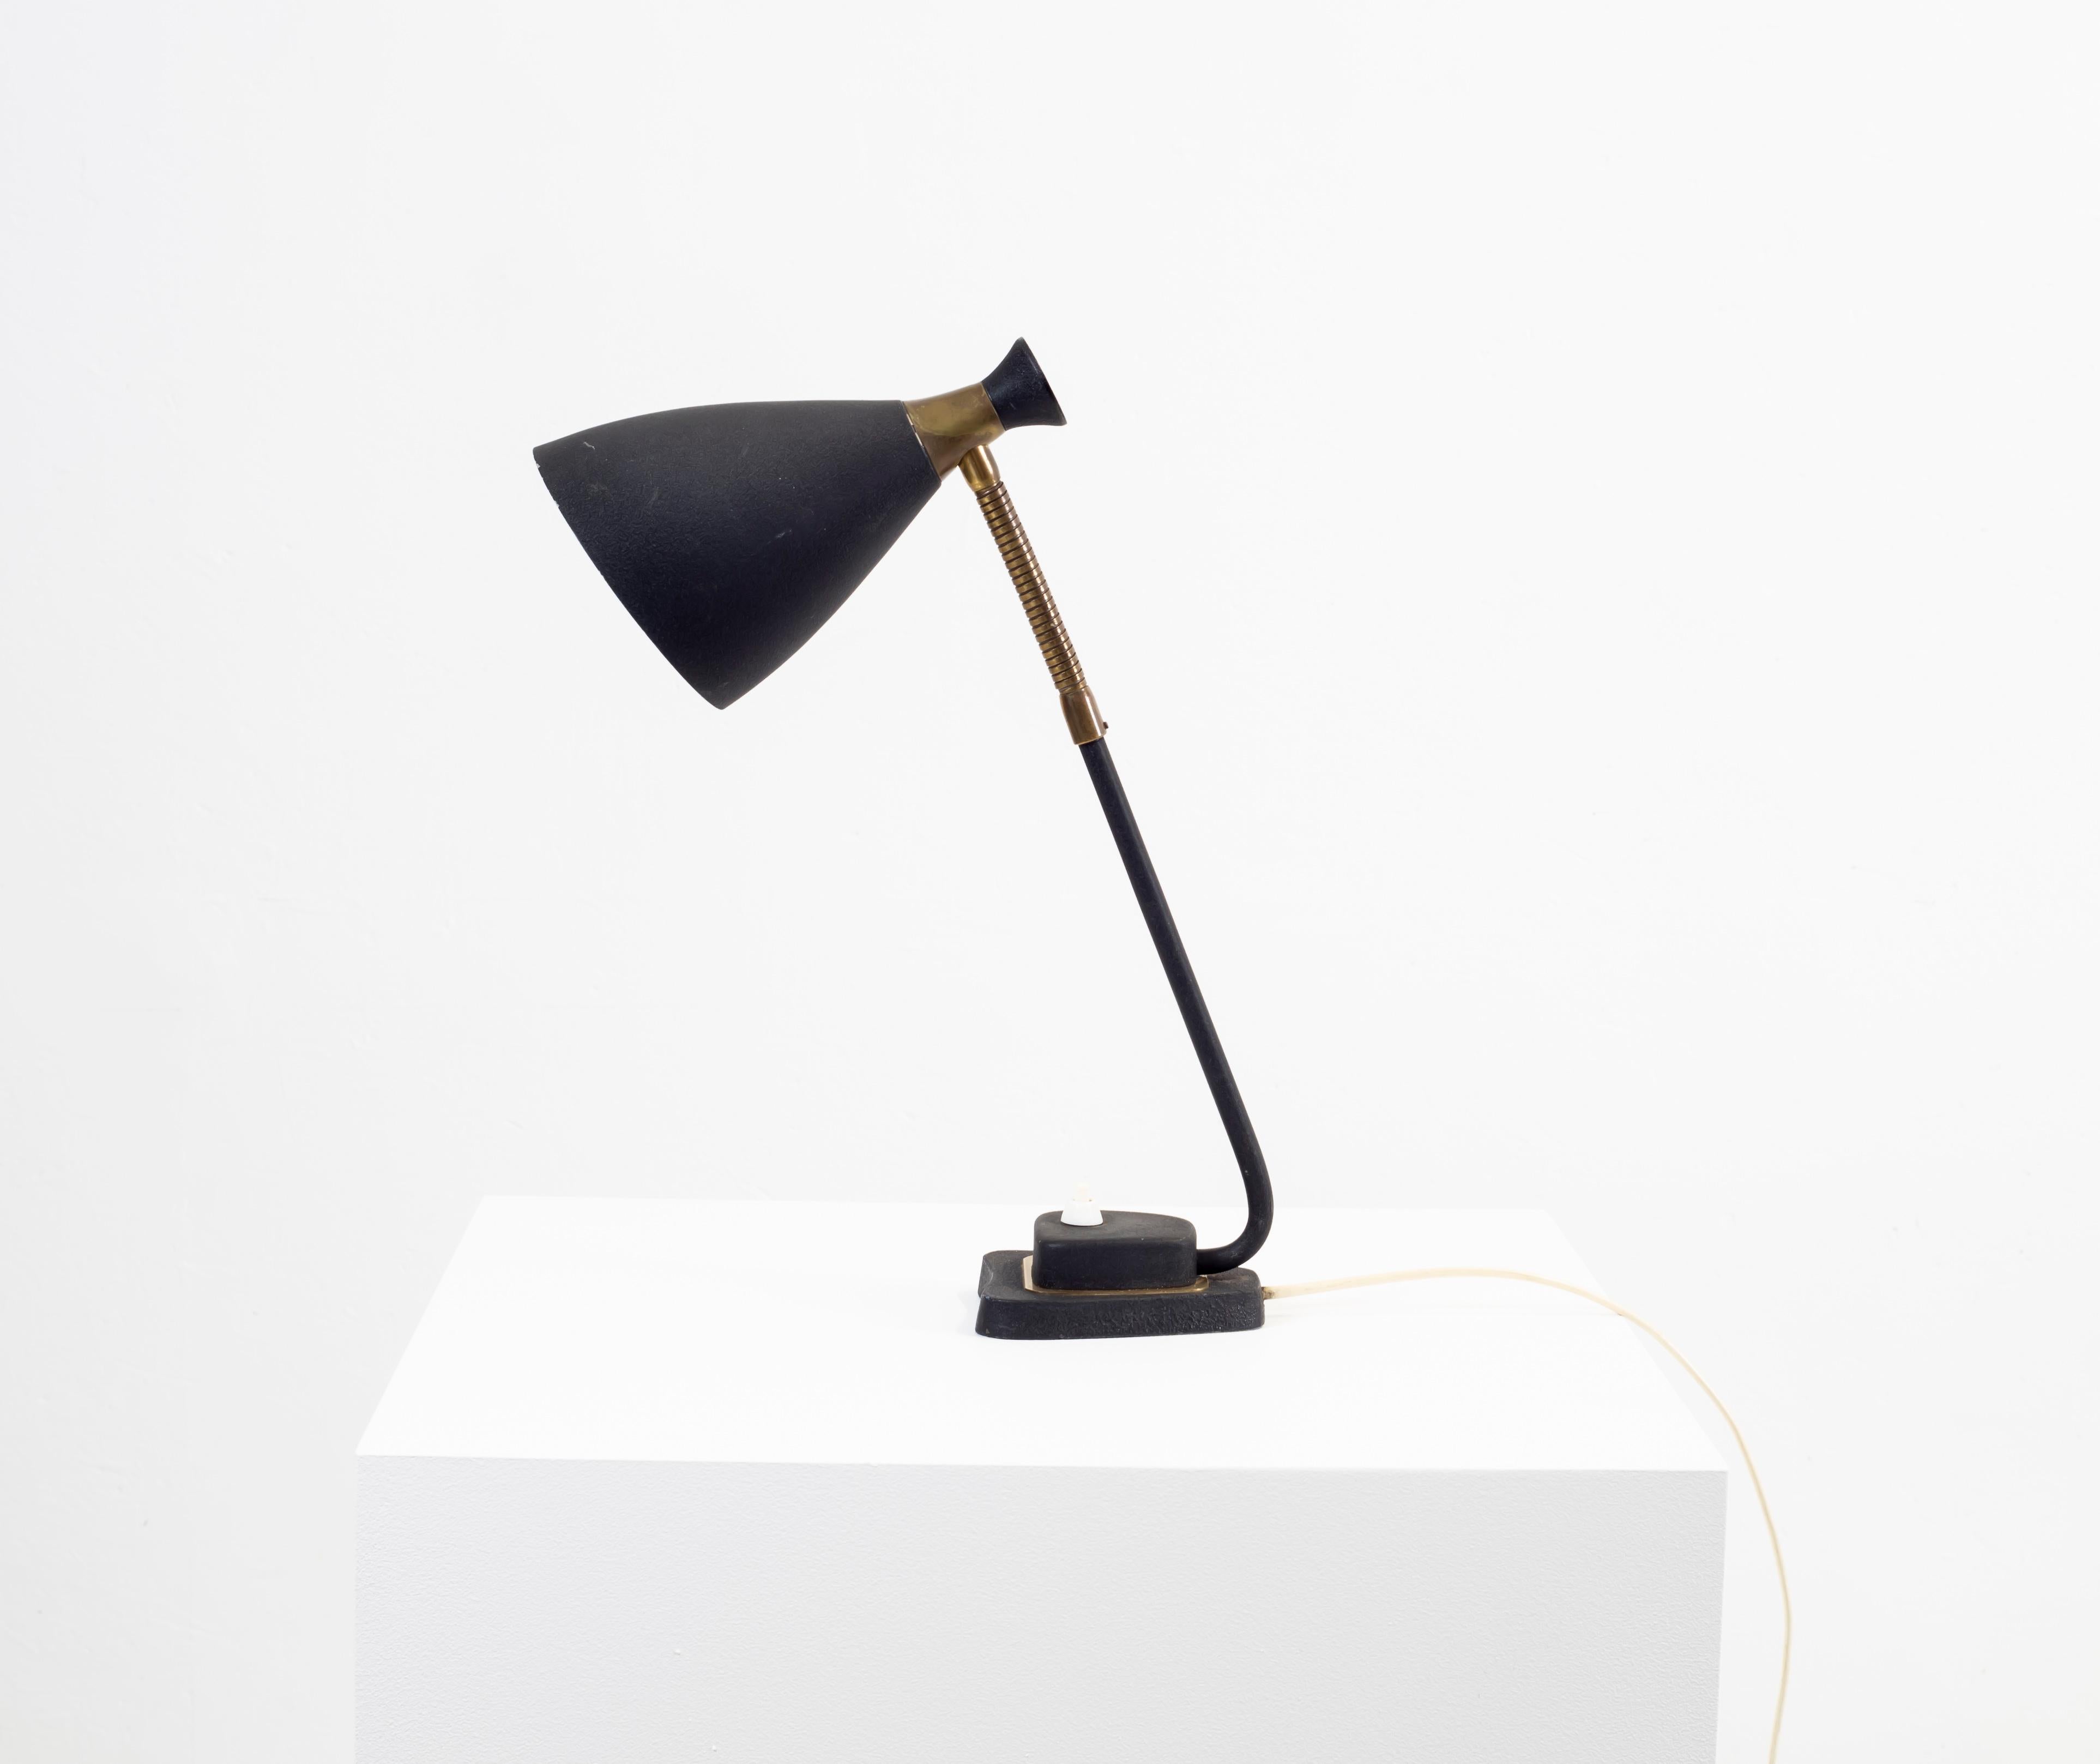 Decorative and modernist table lamp in steel with a black powder coating. Designed and made in Norway from circa 1950s second half. The lamp is fully working and in good vintage condition.